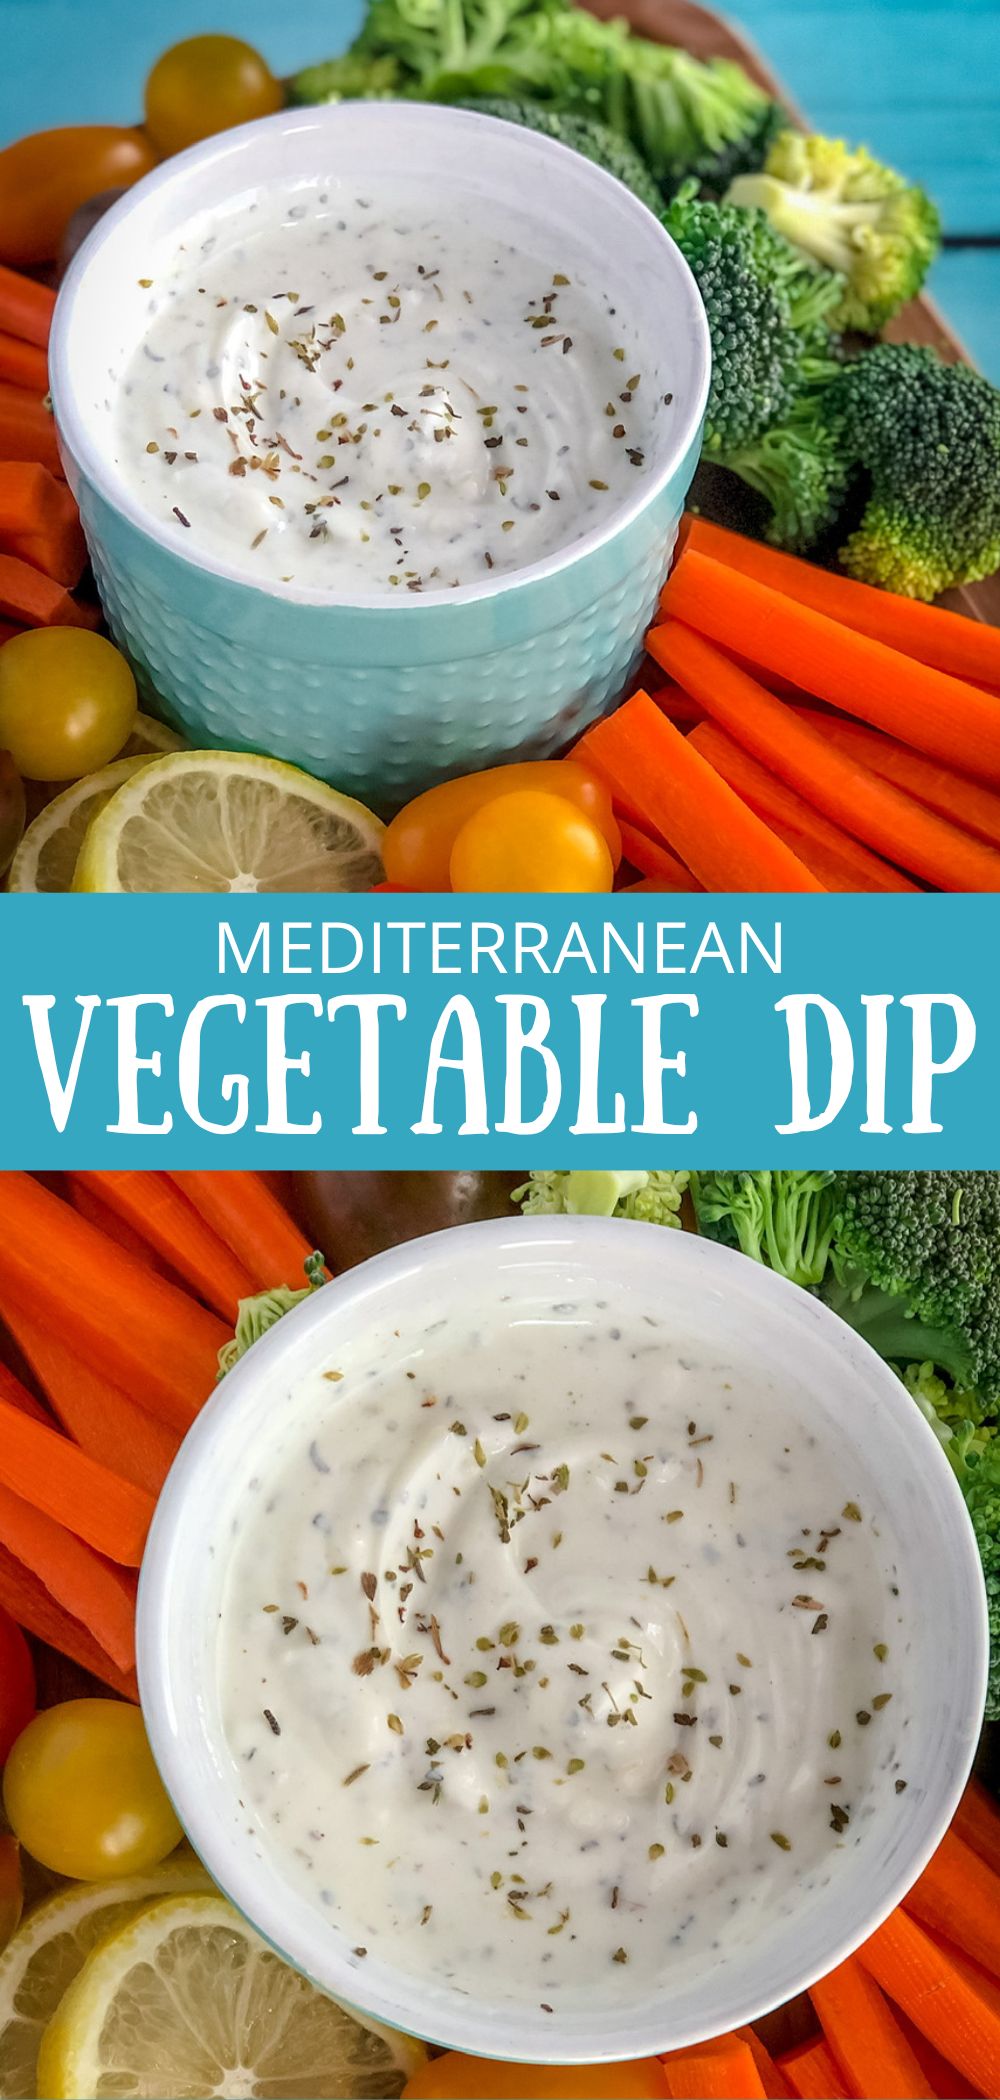 dip and vegetables